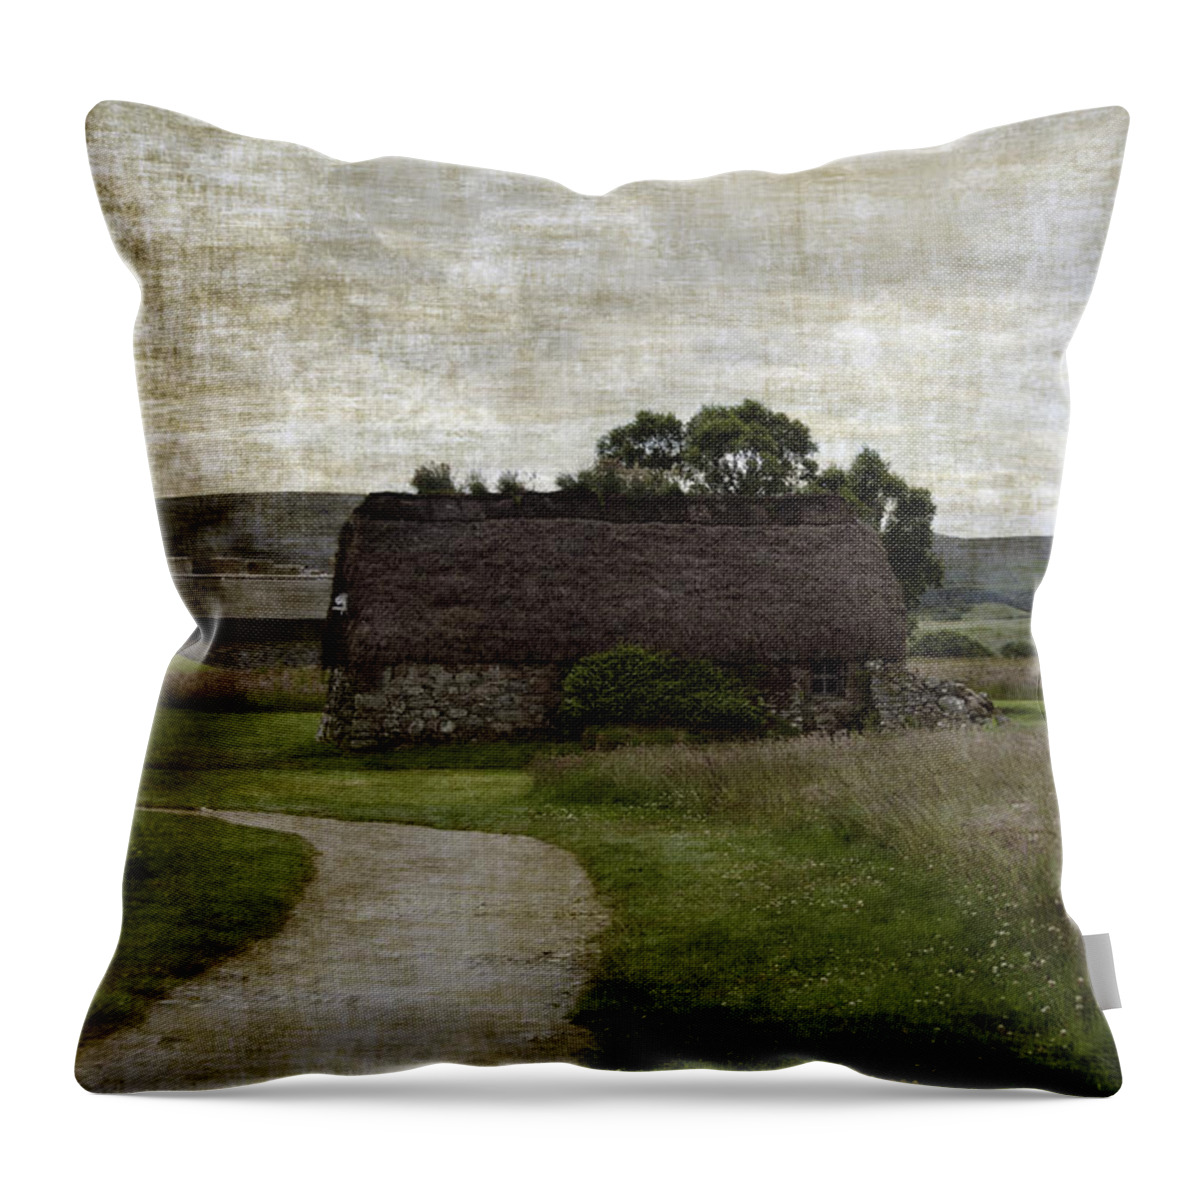 Thatched Roofed Throw Pillow featuring the photograph Old house in Culloden Battlefield by RicardMN Photography